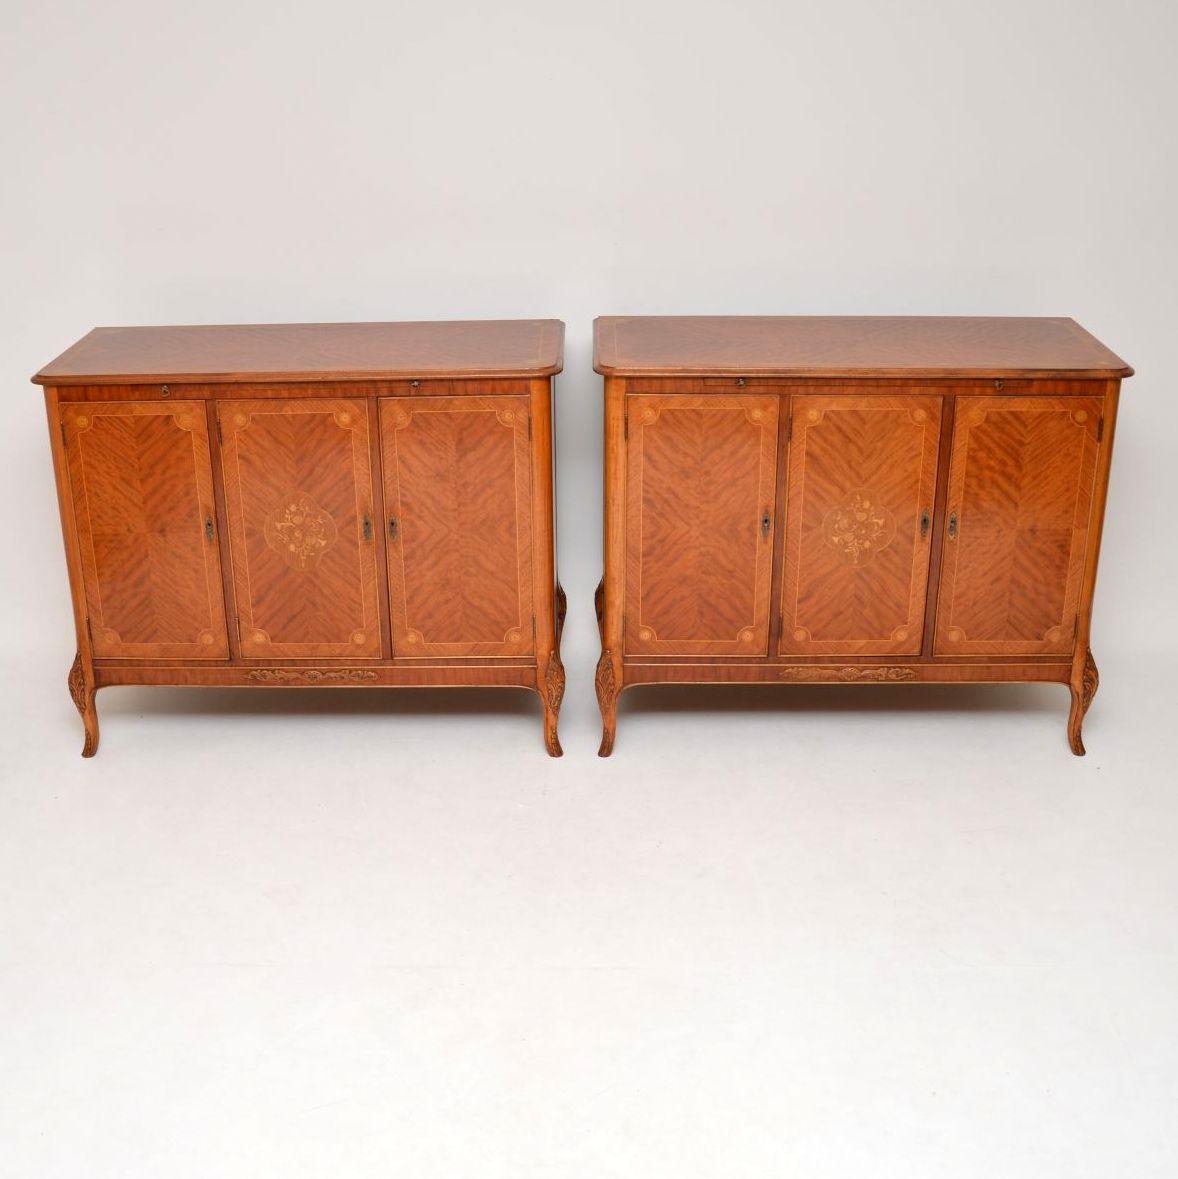 It’s very rare to find a matching pair of antique cabinets of this quality, especially in king wood & with such fabulous interiors. These cabinets are antique French style & in excellent condition, having just been polished & I would date them to